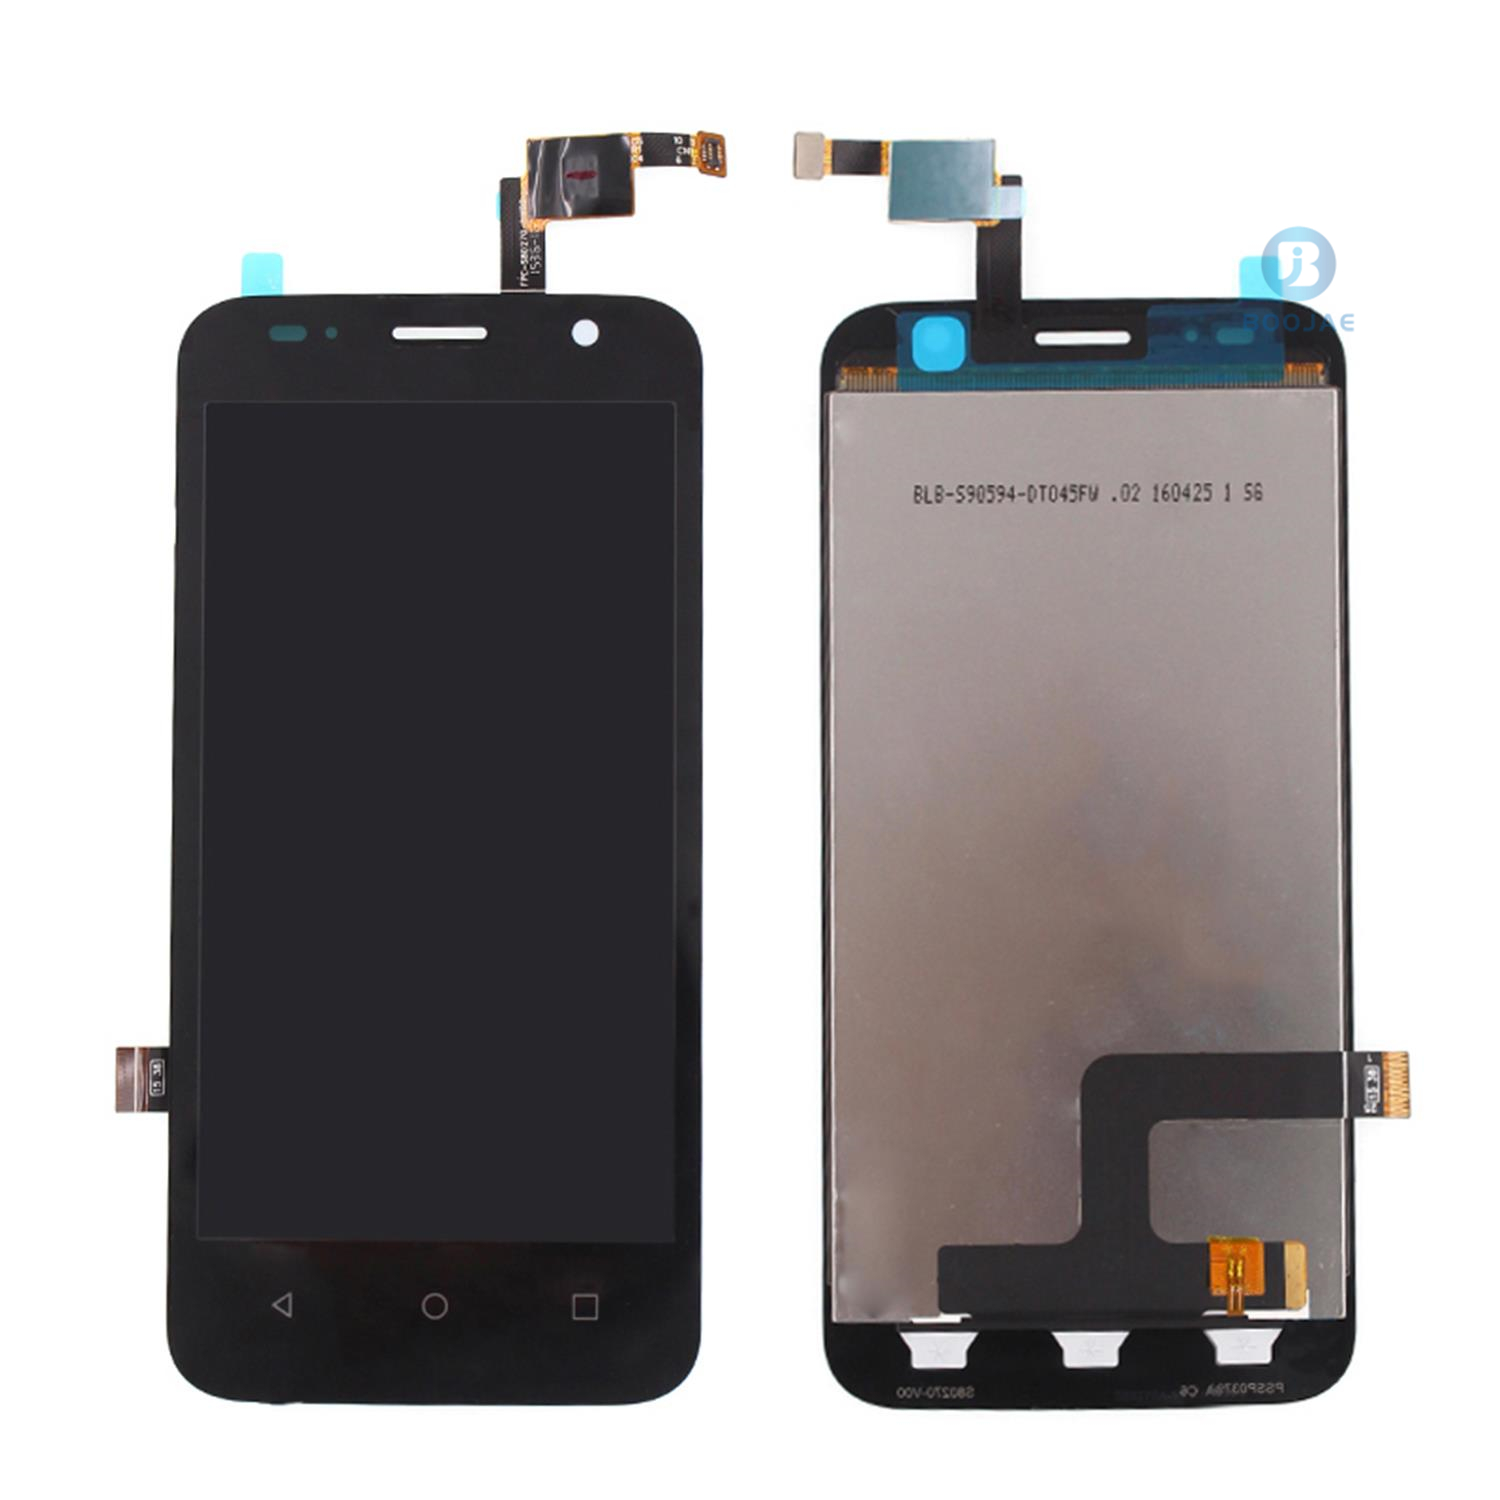 ZTE Z813 LCD Screen Display, Lcd Assembly Replacement